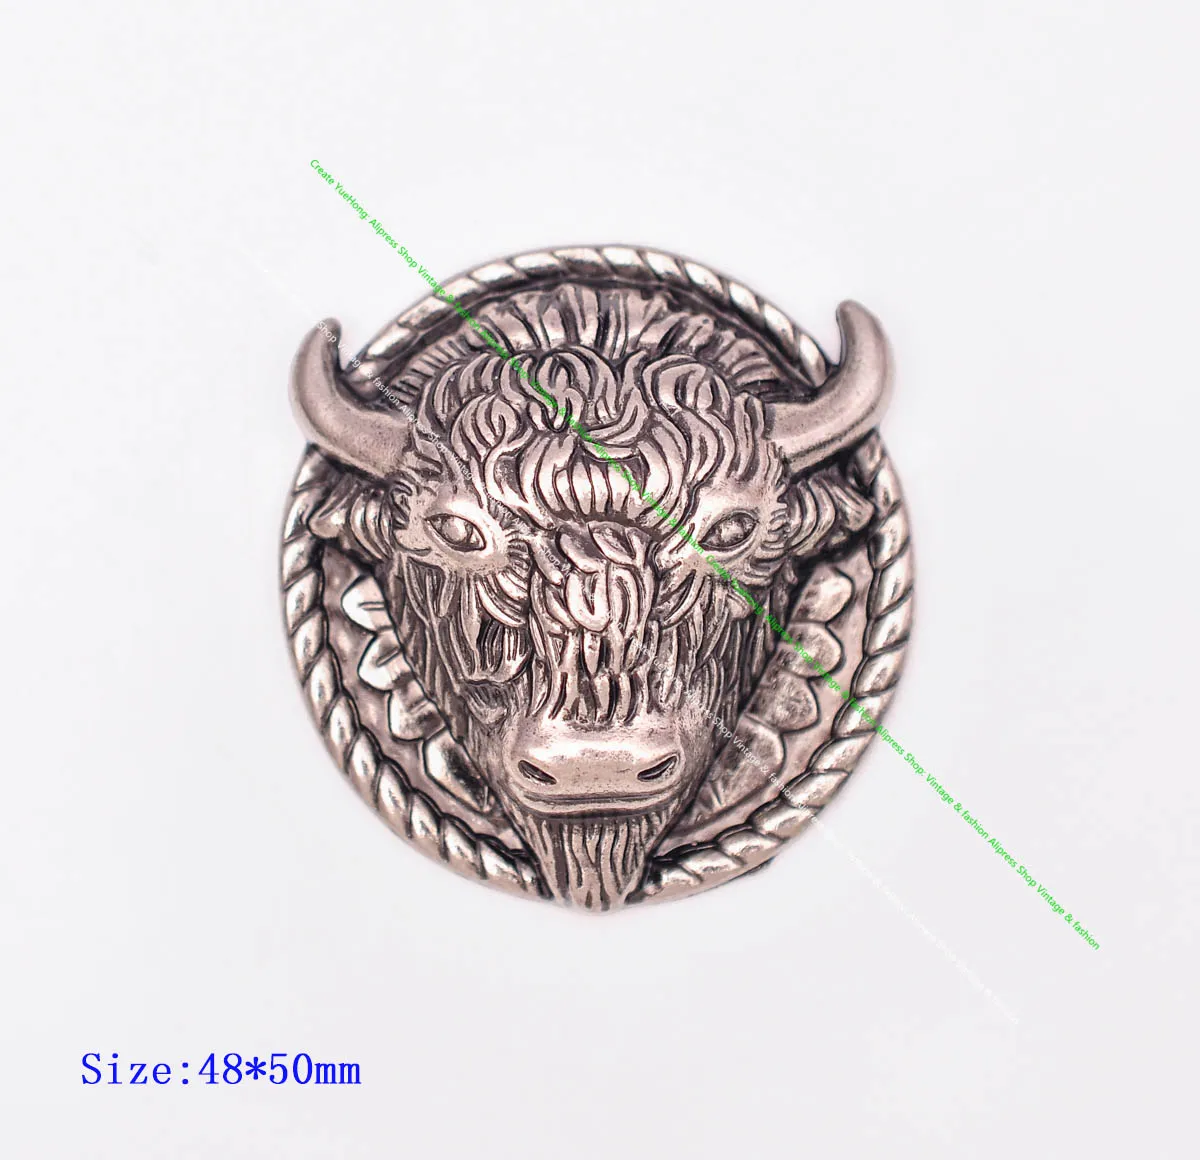 

2Pc 48*50Mm Heavy Quality Antique Silver Western Buffalo Head Bison Leathercraft Accessories Horse Saddles Belt Concho Screwback